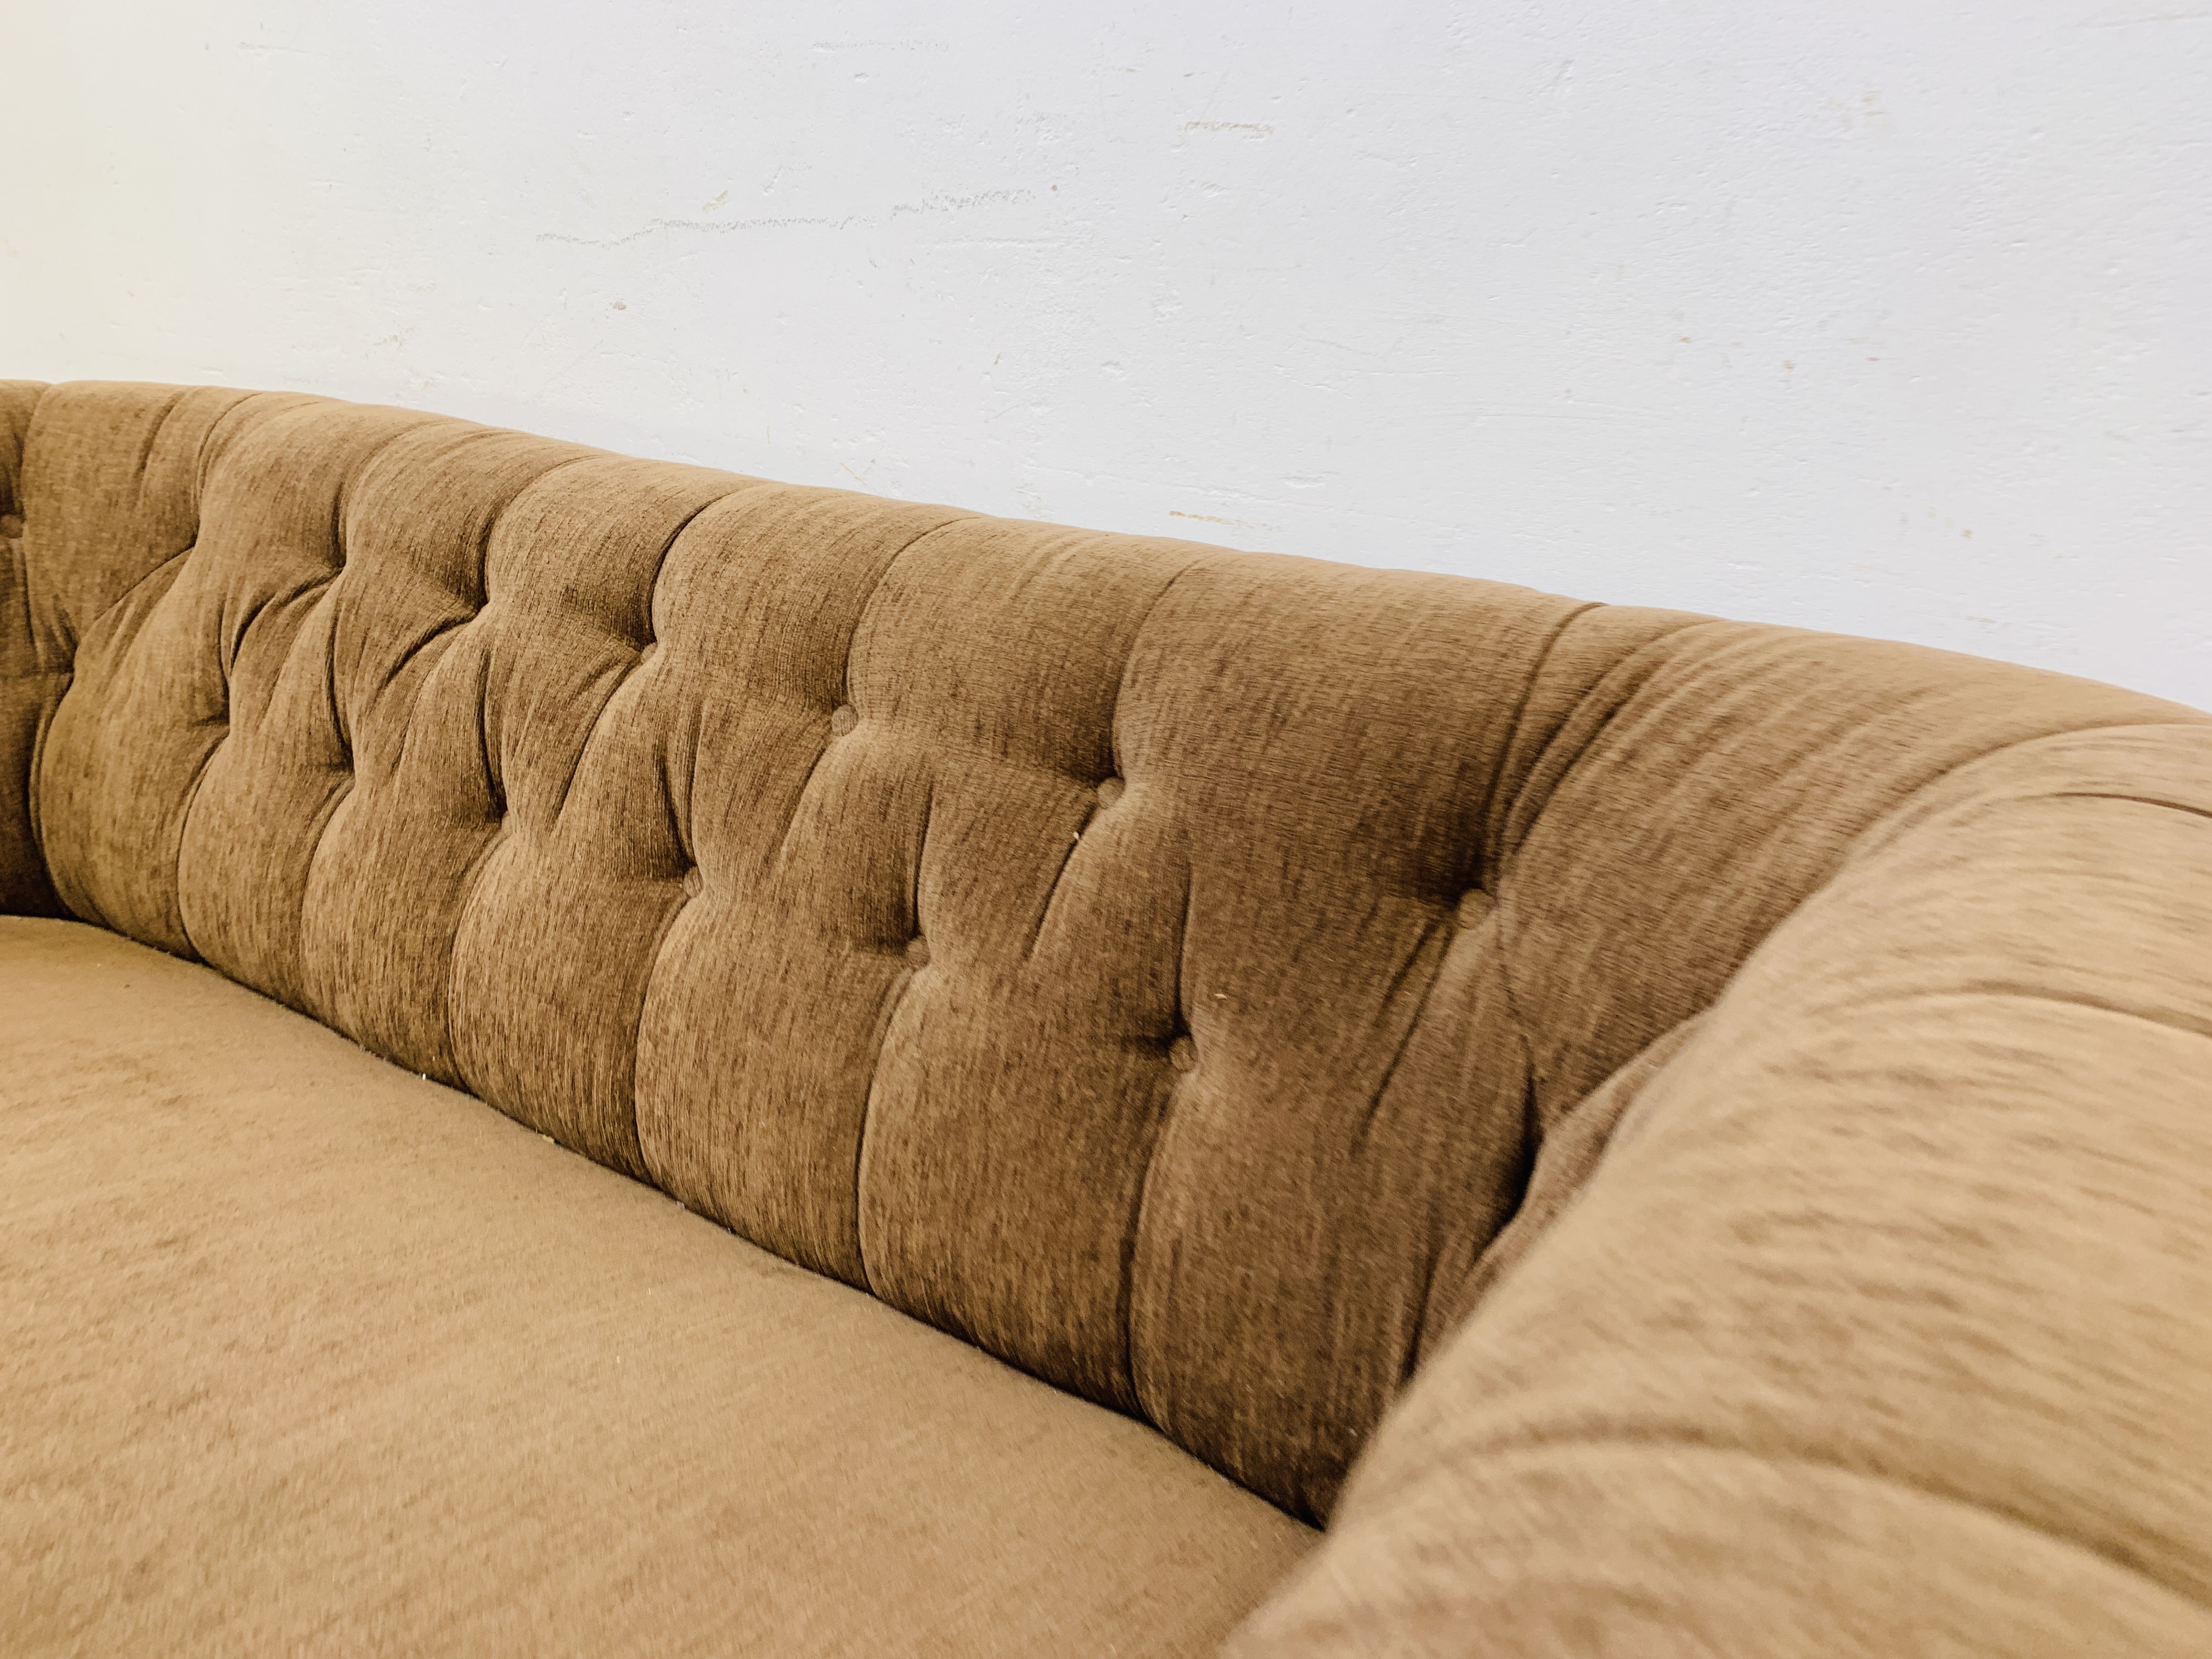 A MODERN BROWN CHESTERFIELD STYLE BUTTON BACK SOFA. L 195CM. D 92CM. H 75CM. - Image 5 of 8